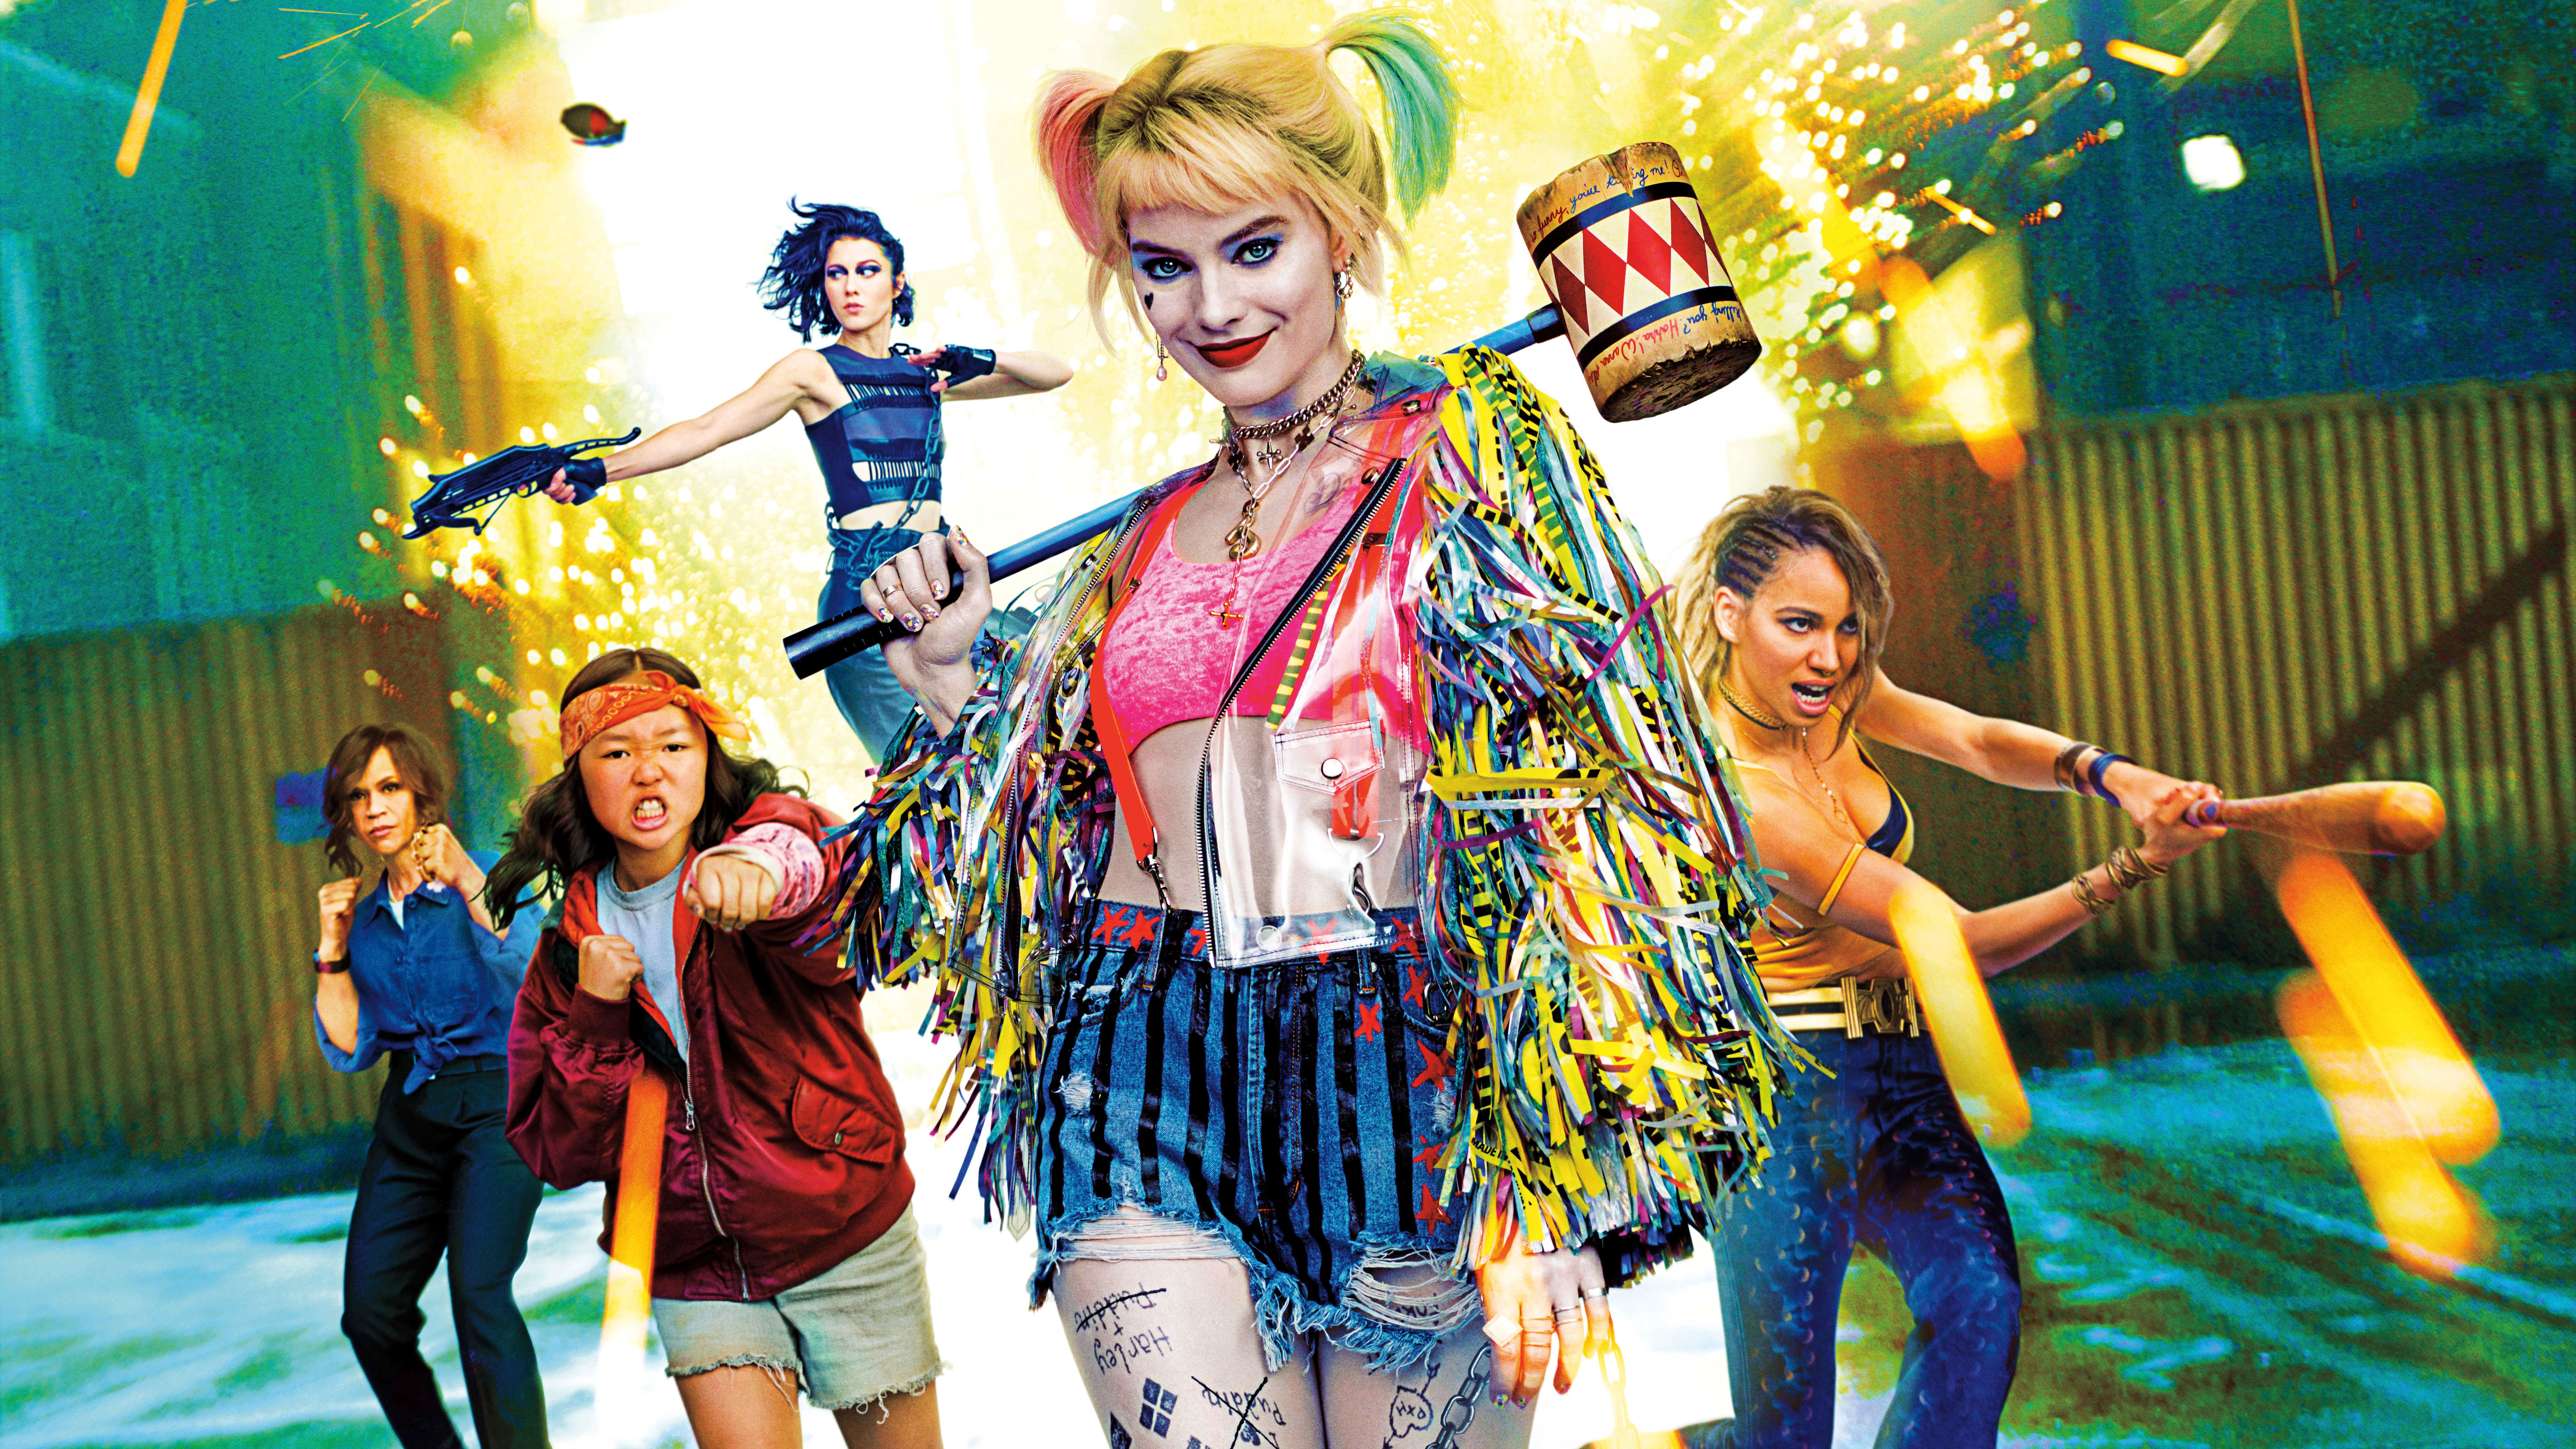 Birds of Prey (and the Fantabulous Emancipation of One Harley Quinn) 8k Ultra HD Wallpaper